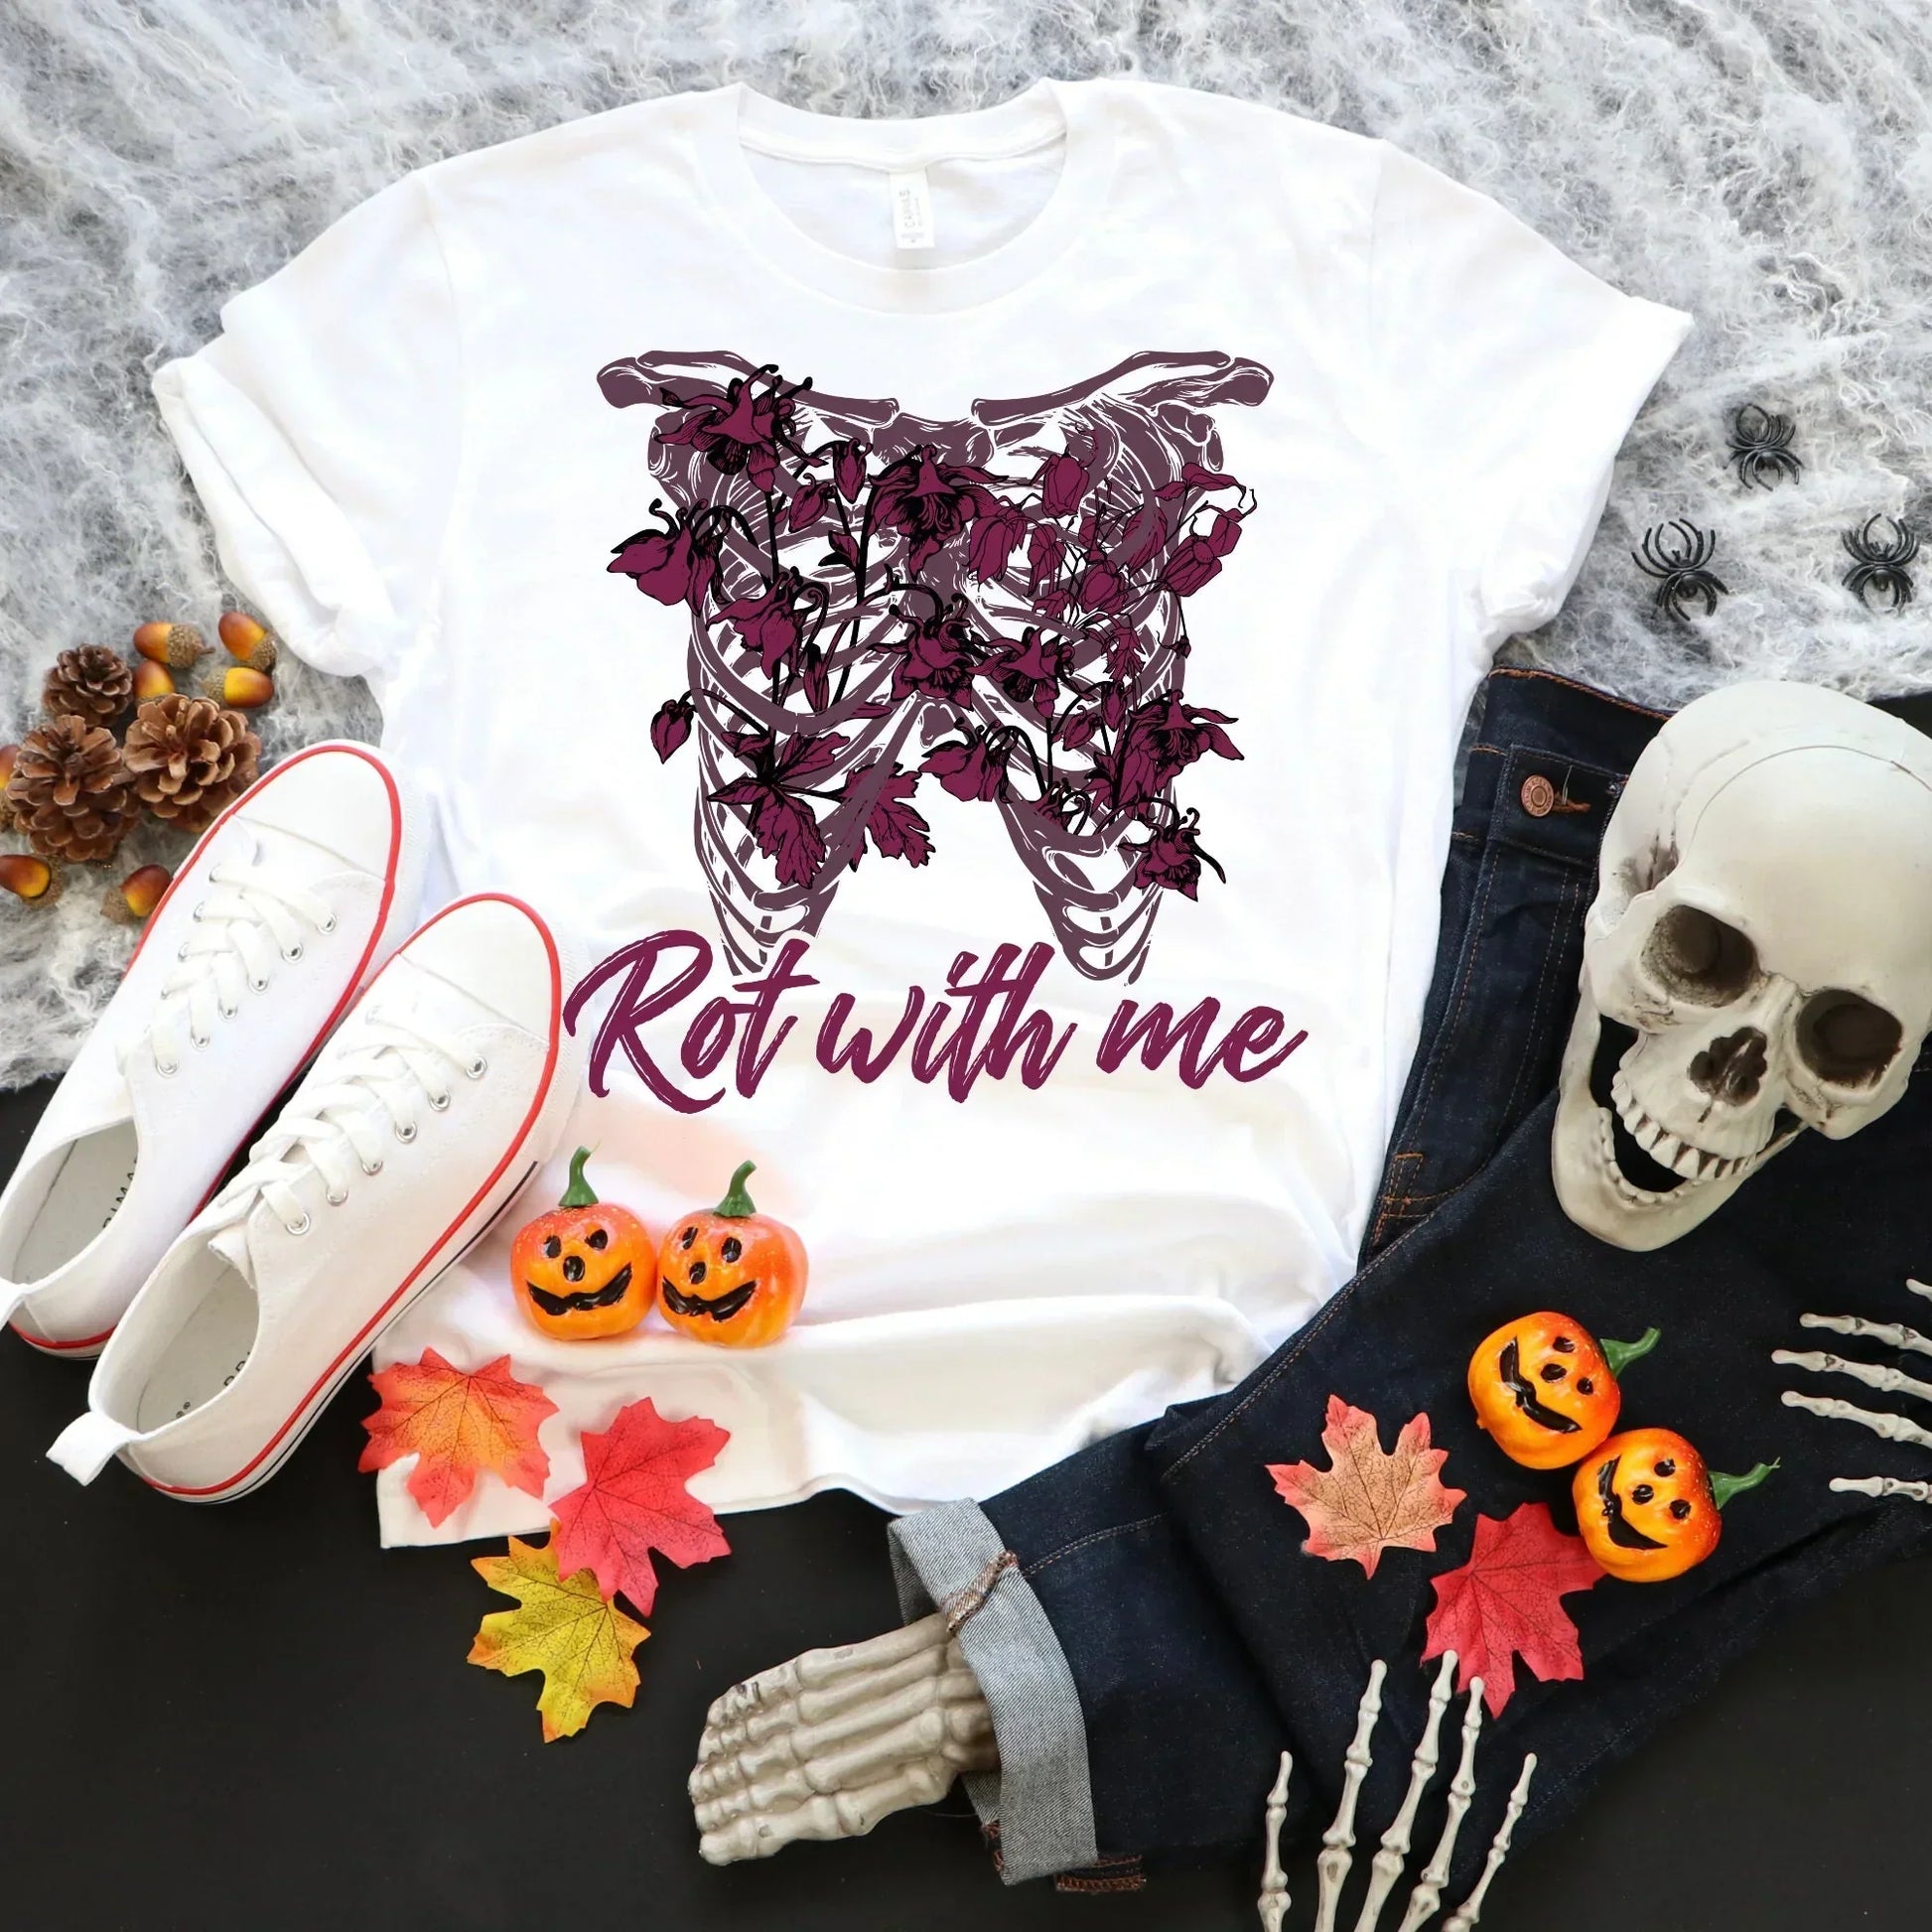 Gothic Shirt, Halloween Sweatshirt, Witchy Vibes, Bats & Dead Roses Shirt, Moon Shirt, Magical Witch Shirt, Goth Style, Rot with Me, EMO Tee HMDesignStudioUS